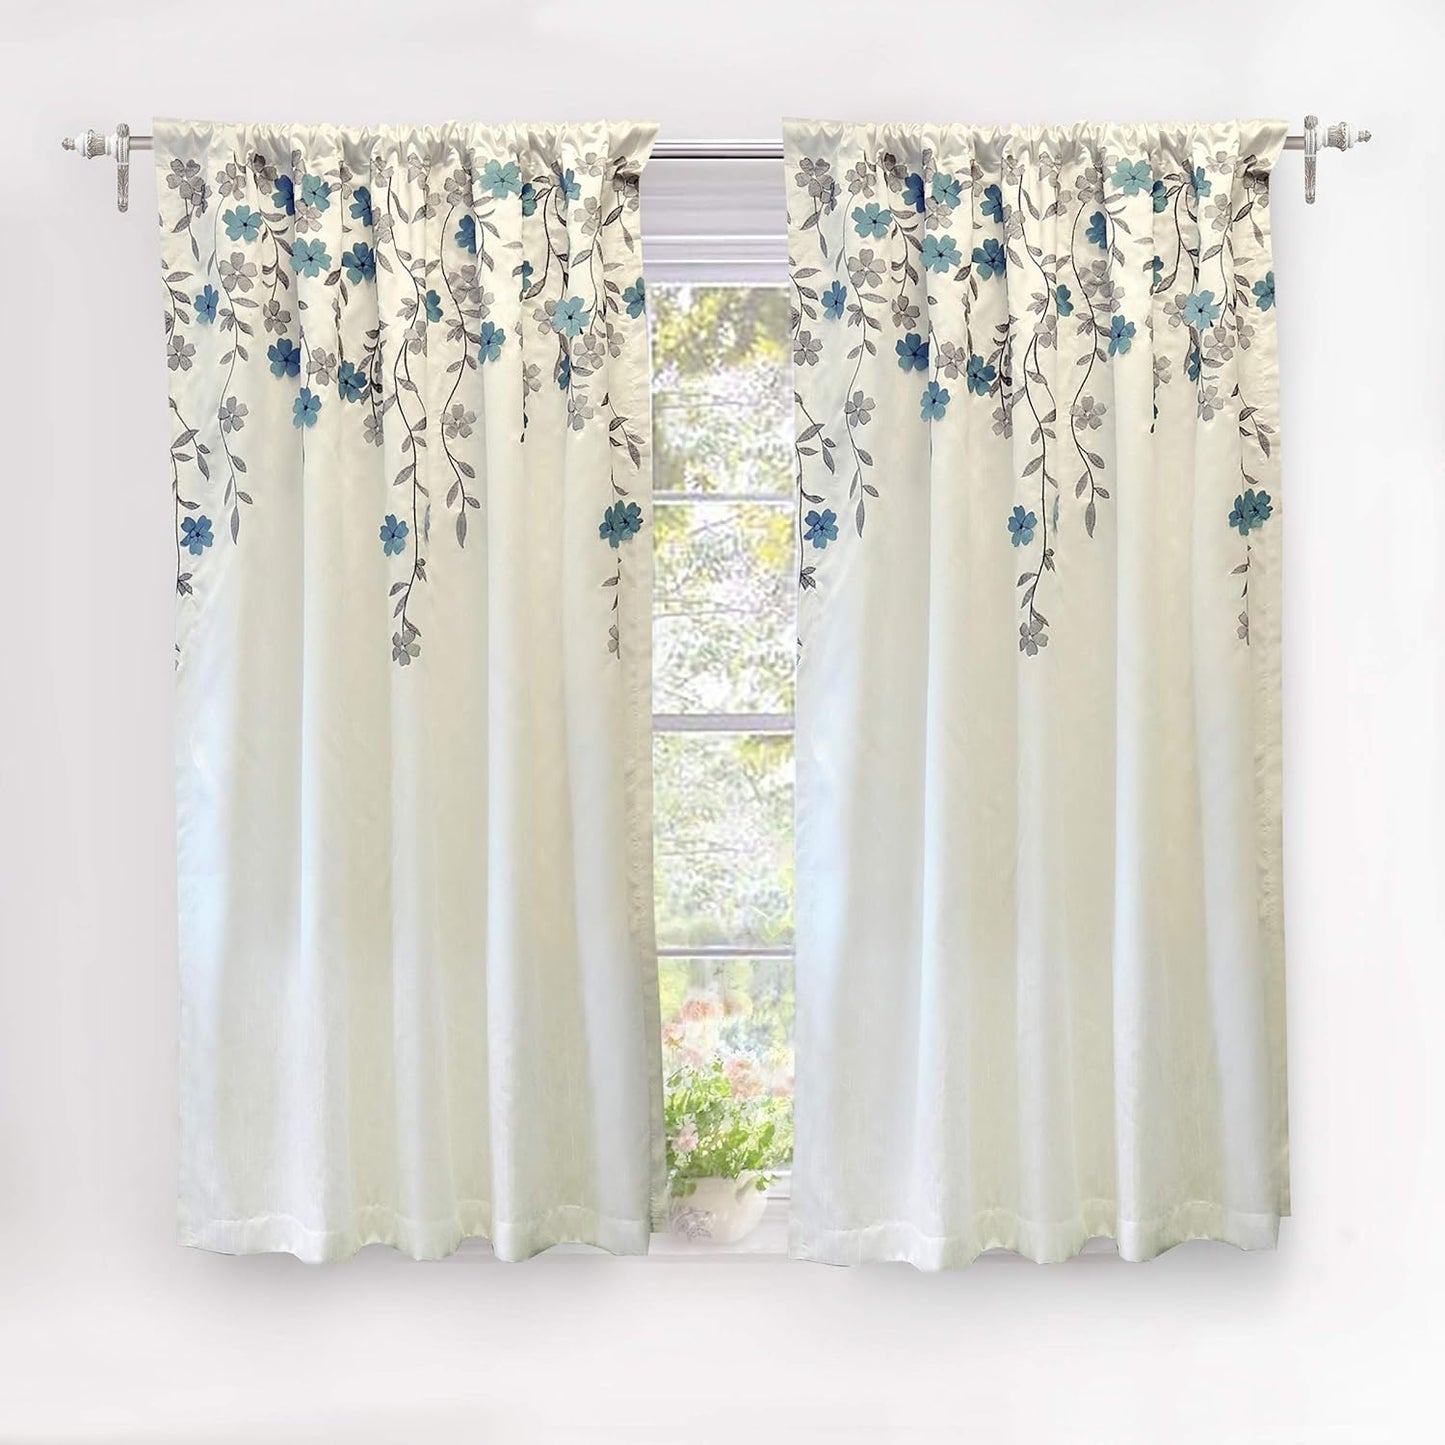 Driftaway Aubree Weeping Flower Print Thermal Room Darkening Privacy Window Curtain for Bedroom Living Room Rod Pocket 2 Panels 52 Inch by 84 Inch Blue  DriftAway One Panel Ivory Blue 50"X54" 